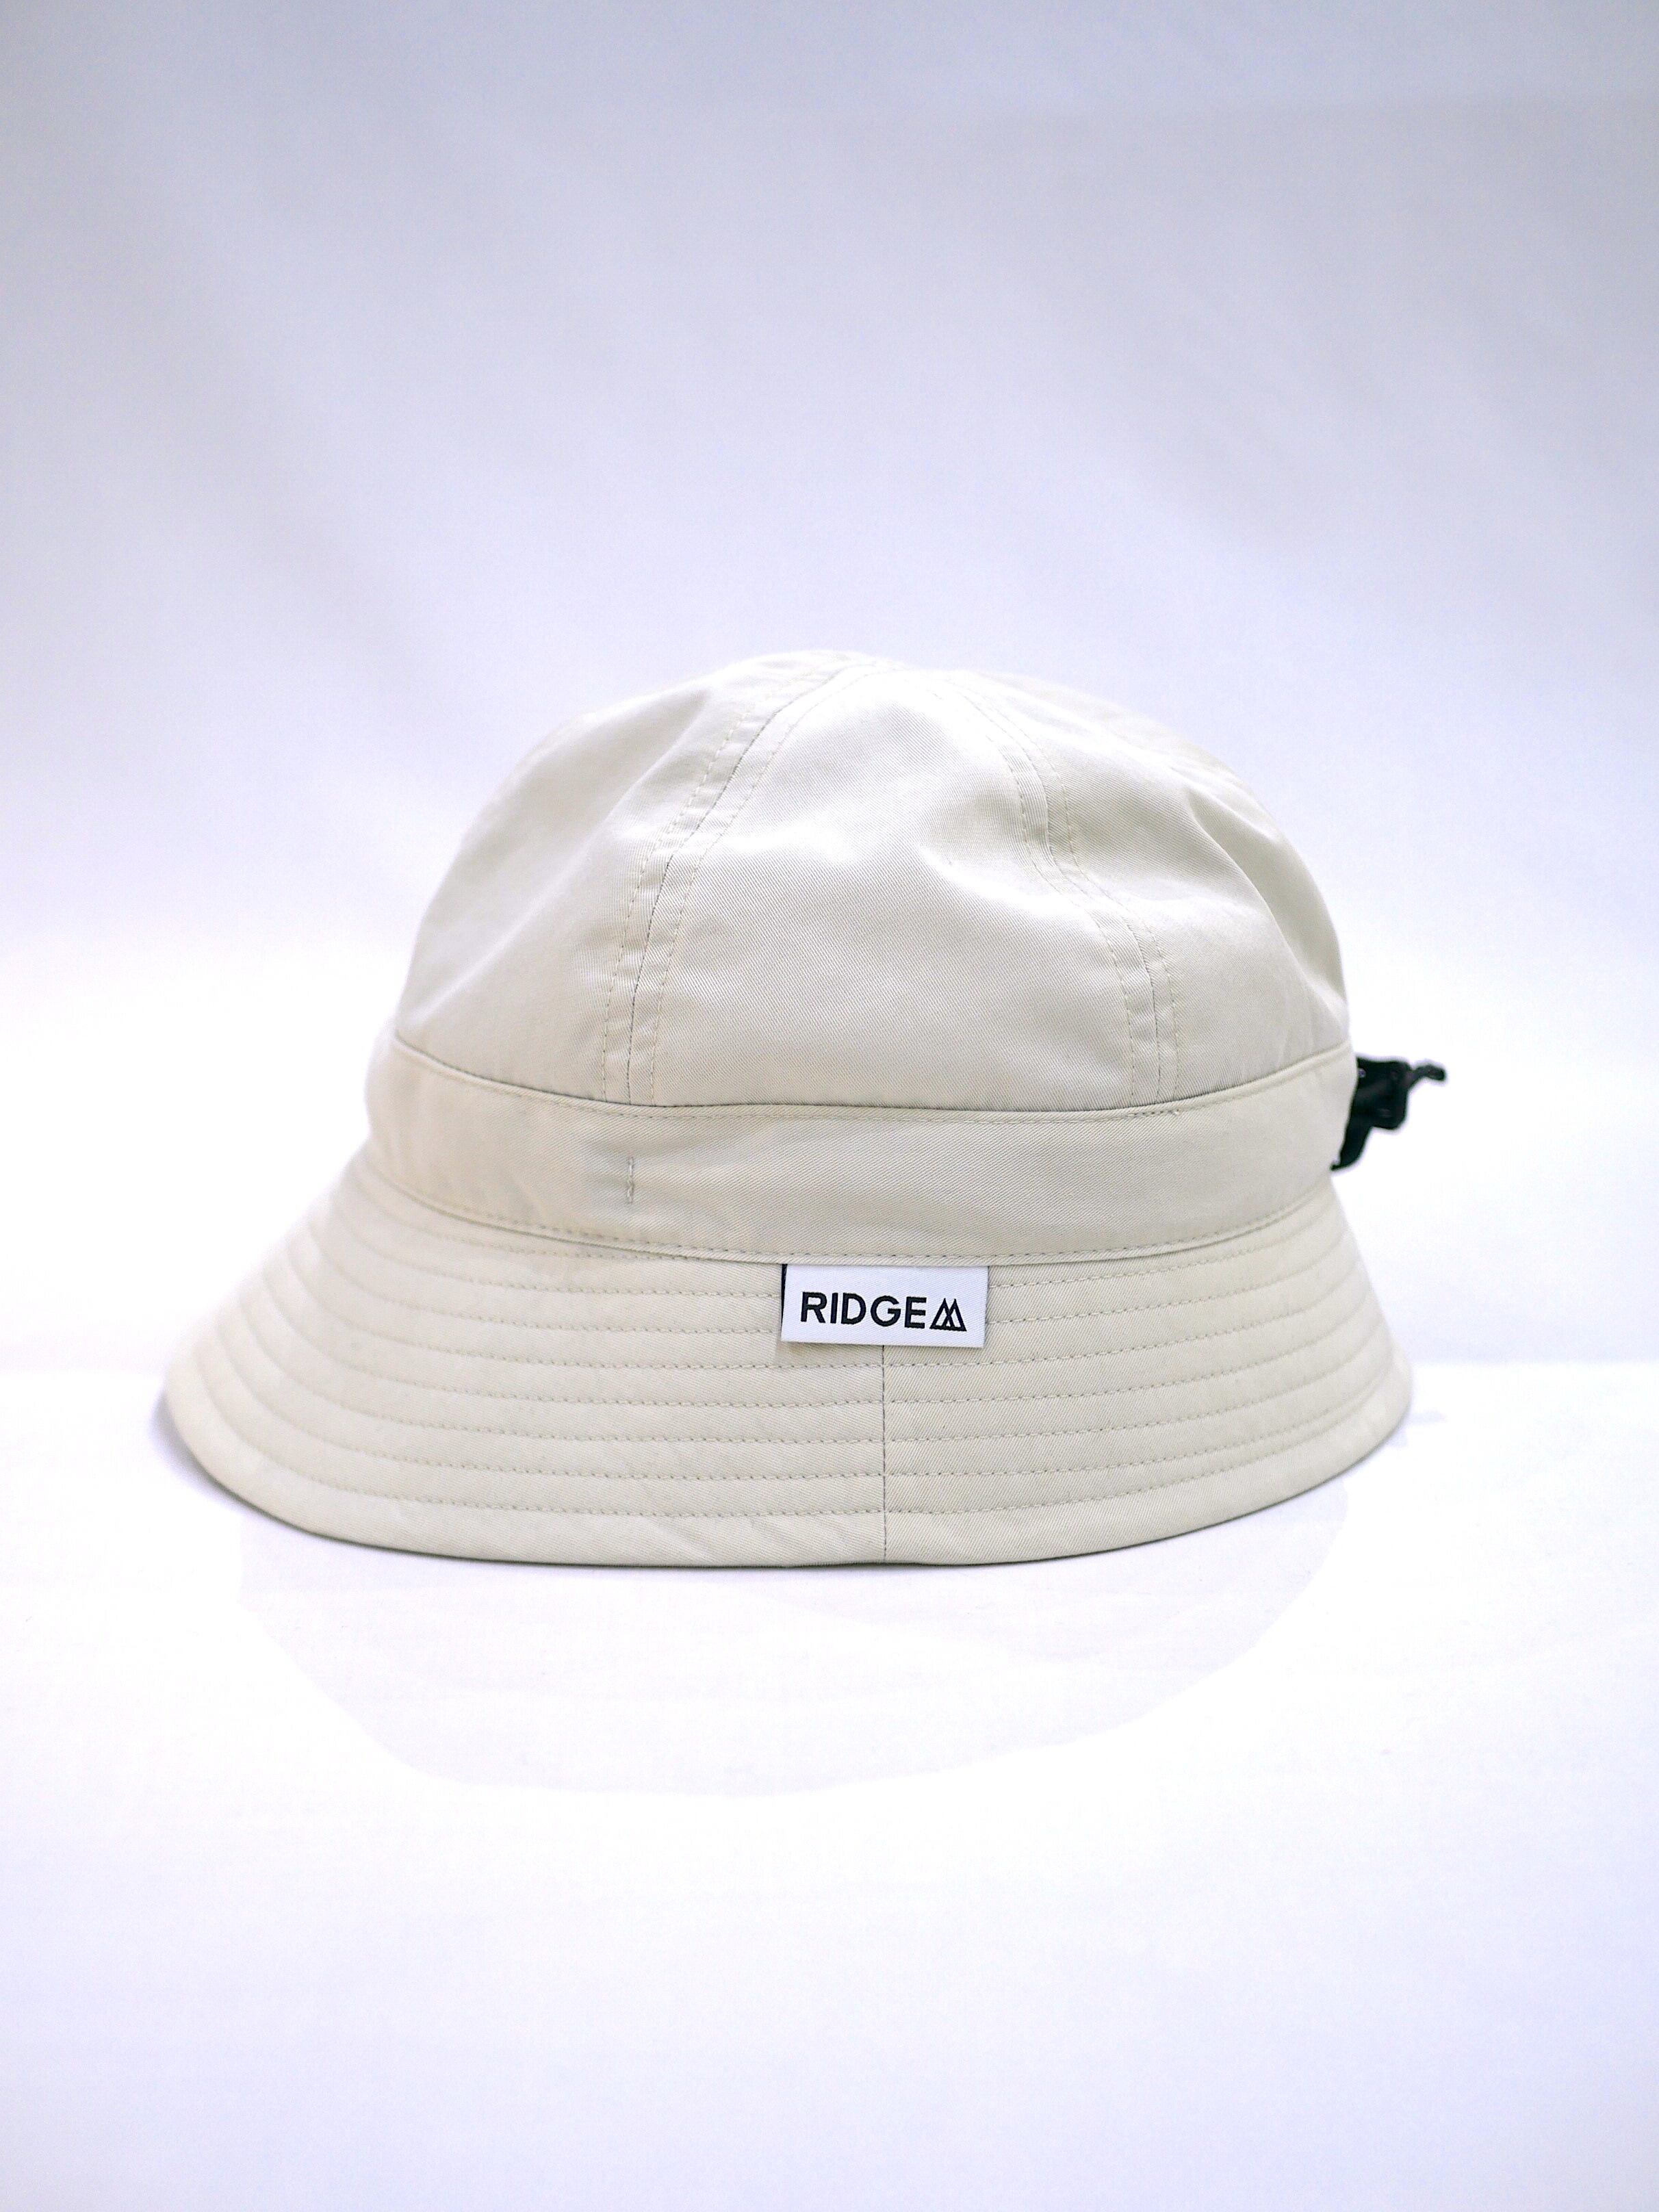 RIDGE MOUNTAIN GEAR / ENOUGH HAT（STVH ver.） | st. valley house - セントバレーハウス  powered by BASE